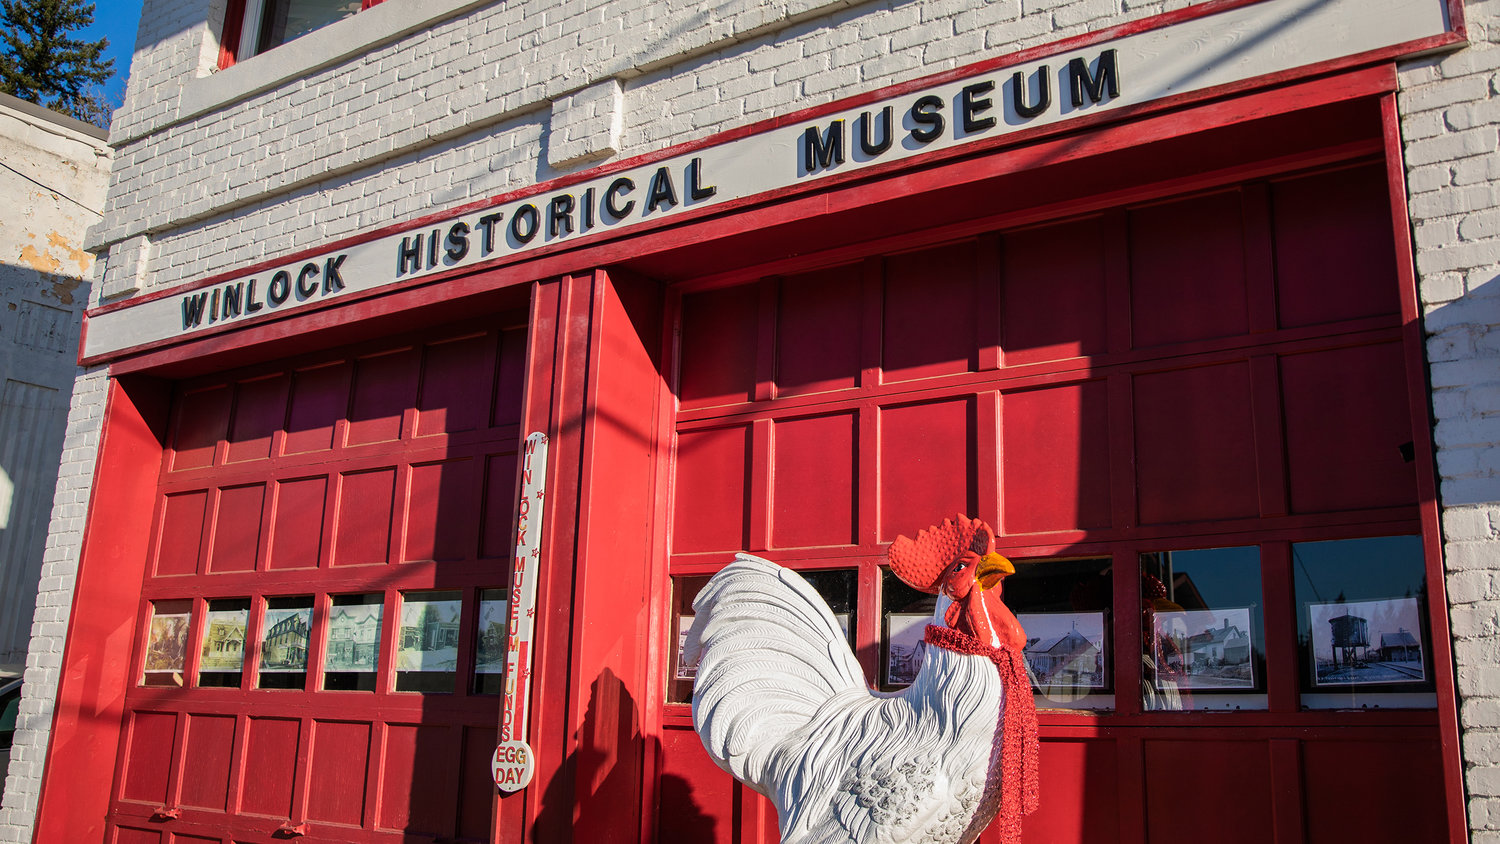 The Winlock Historical Museum is located at 400 NE 1st St. in Winlock.